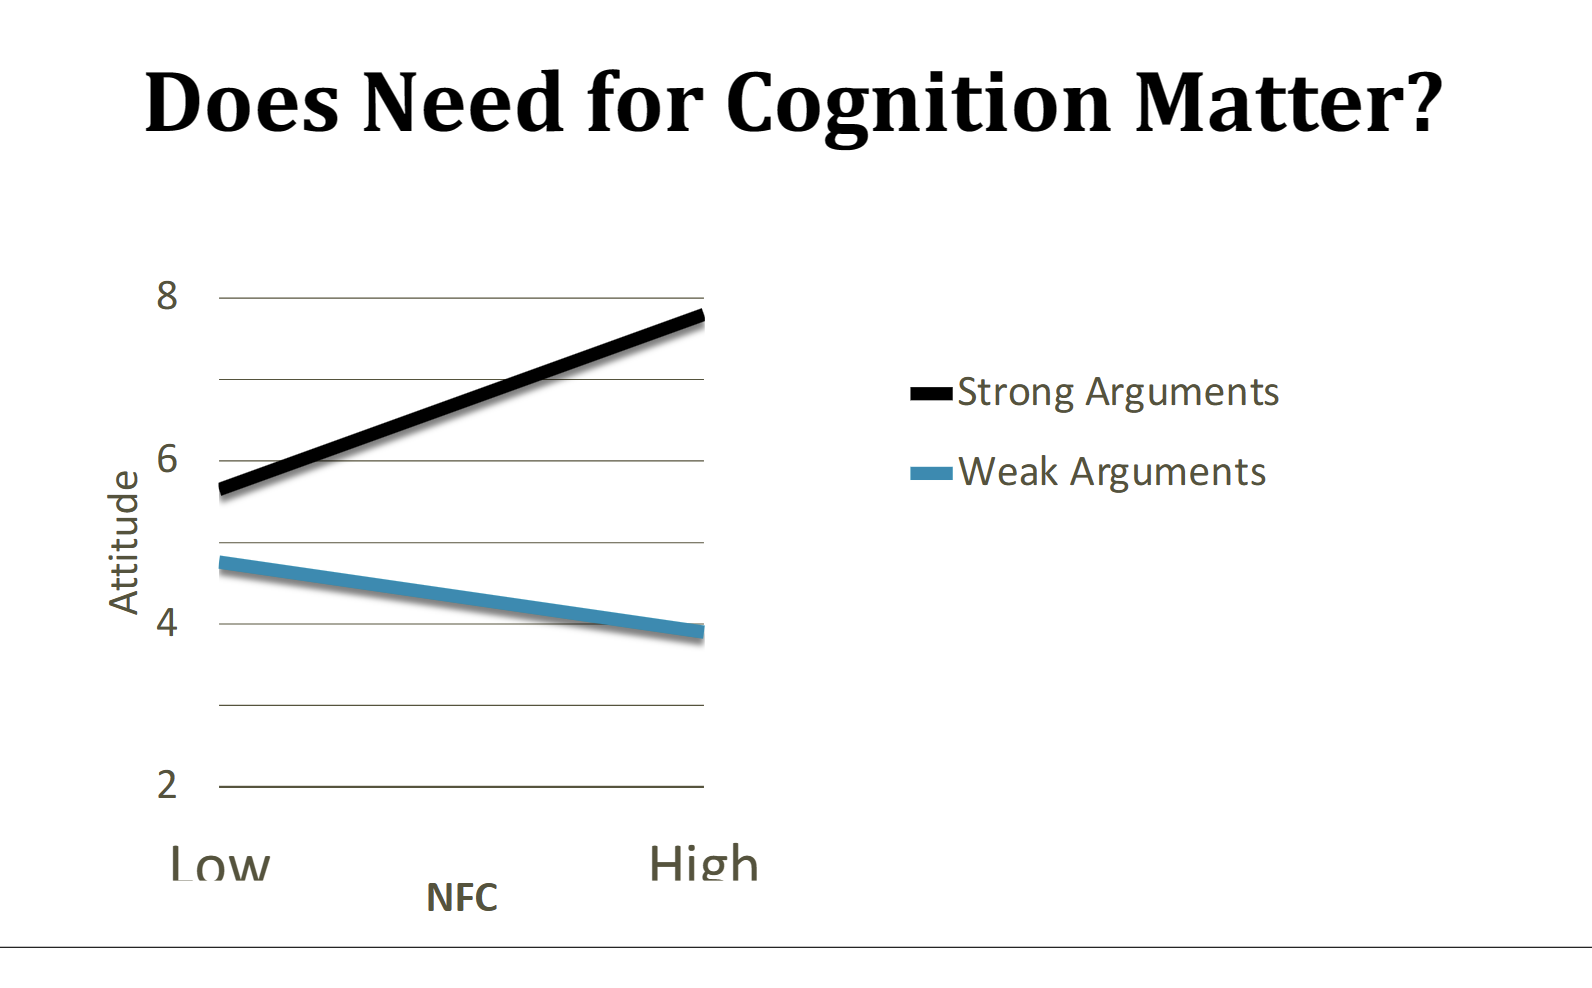 <p>a measure of the extent to which people enjoy thinking deeply and engaging in cognitively effortful activities</p><p></p><p><strong>HIGH NFC → </strong>better with STRONG arguments than weak arguments</p><p><strong>LOW NFC </strong>→ better with WEAK arguments than strong arguments</p><p></p><p>from the research paper: a moderate number of interventions is the most effective in promoting multiple behavior domain changes (no matter the motivation level for the participant) </p>